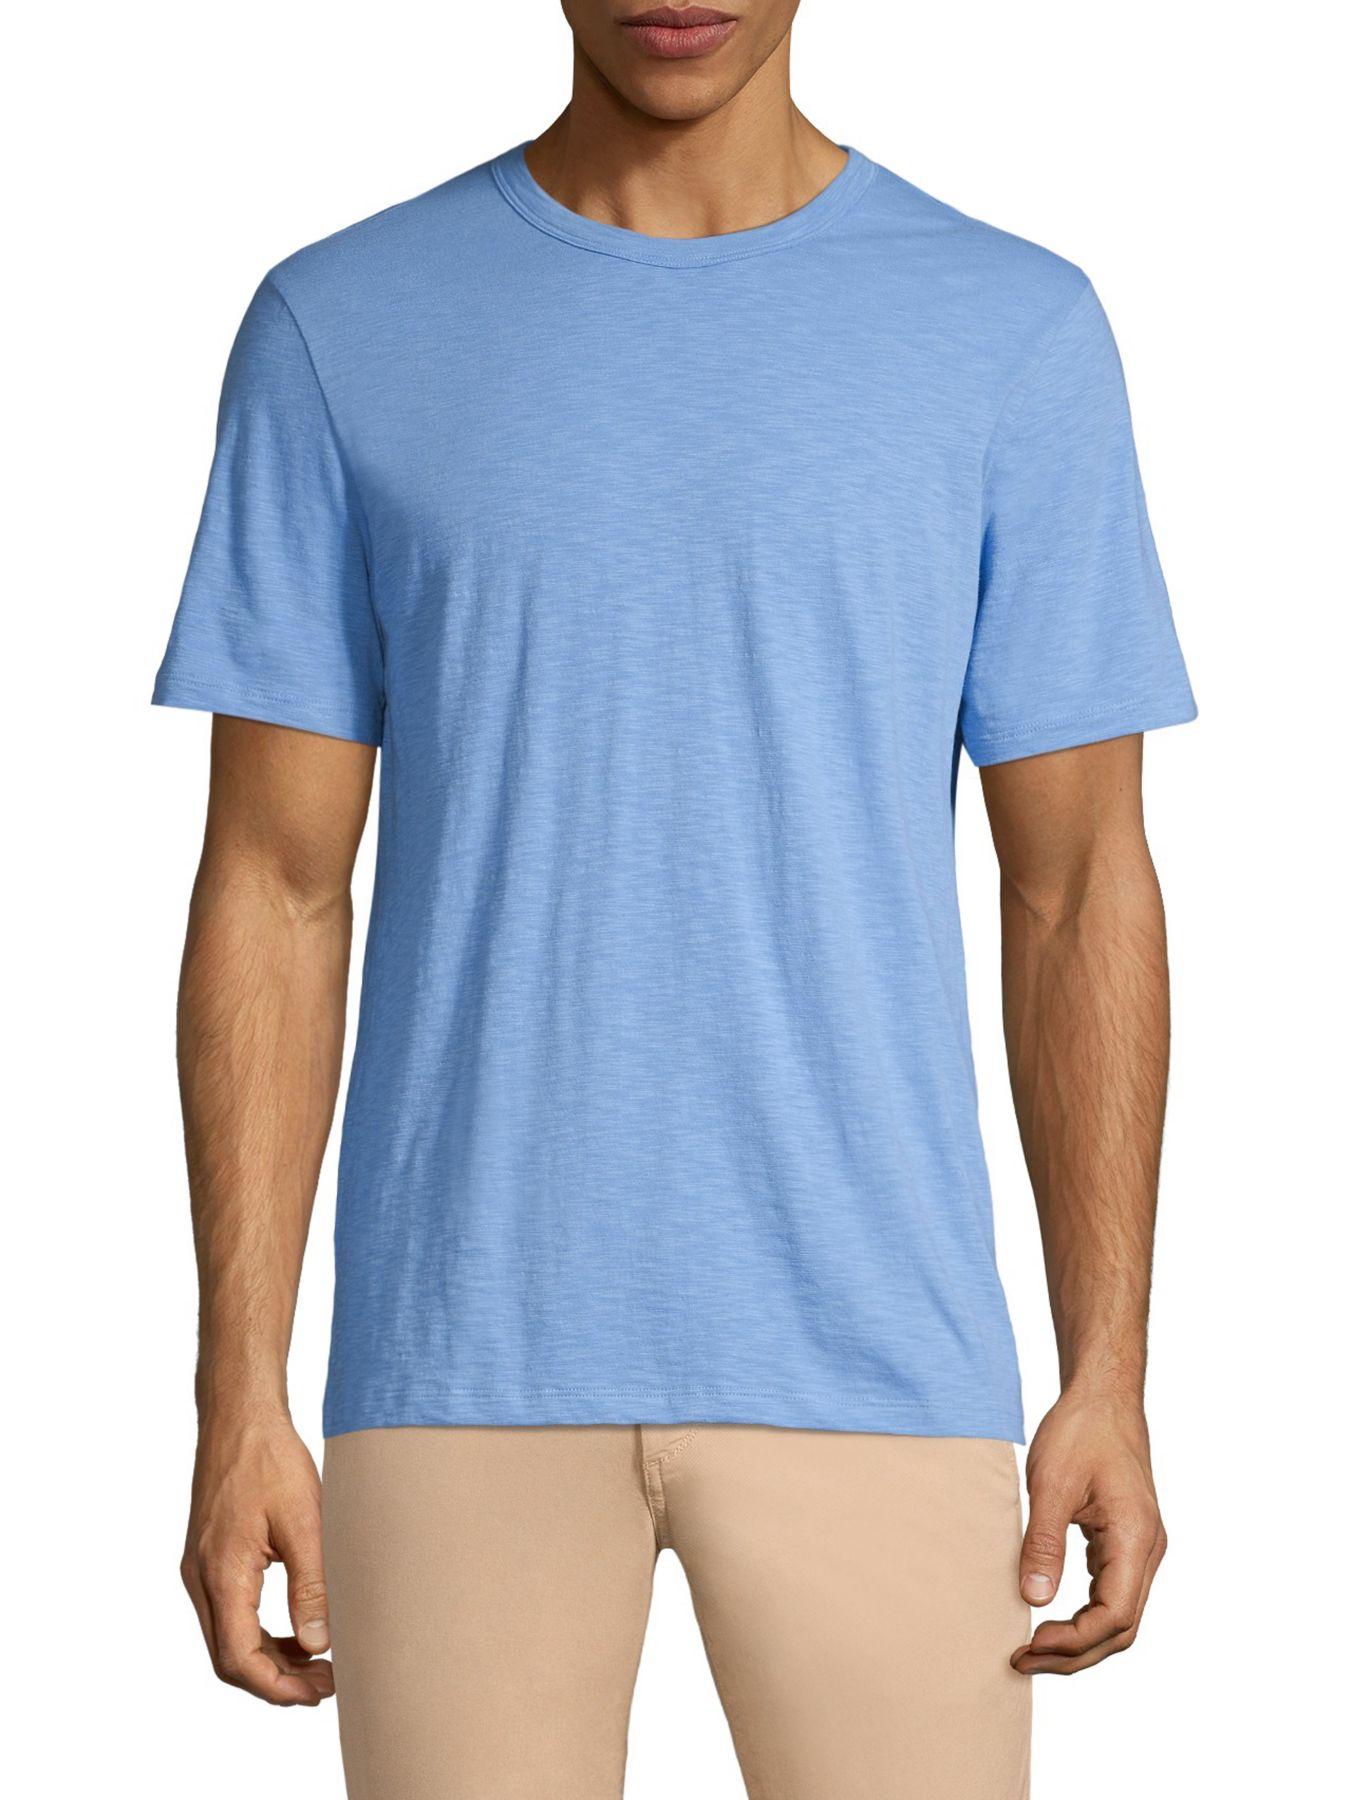 Theory Cotton Topstitching Jersey T-shirt in Blue for Men - Lyst